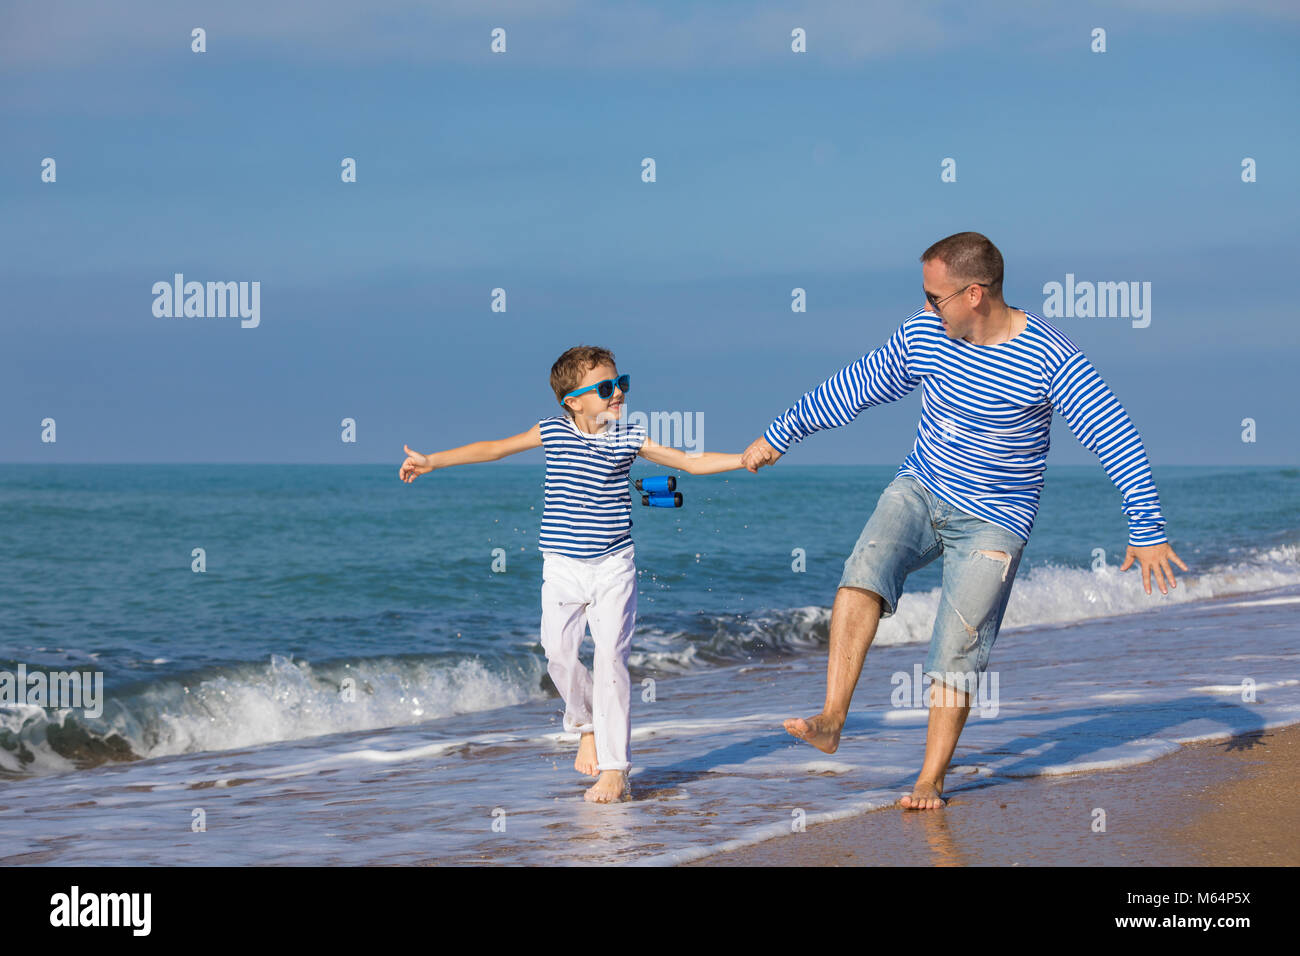 Father and son running on the beach at the day time. They are dressed in sailor's vests. Concept of sailors on vacation and friendly family. Stock Photo